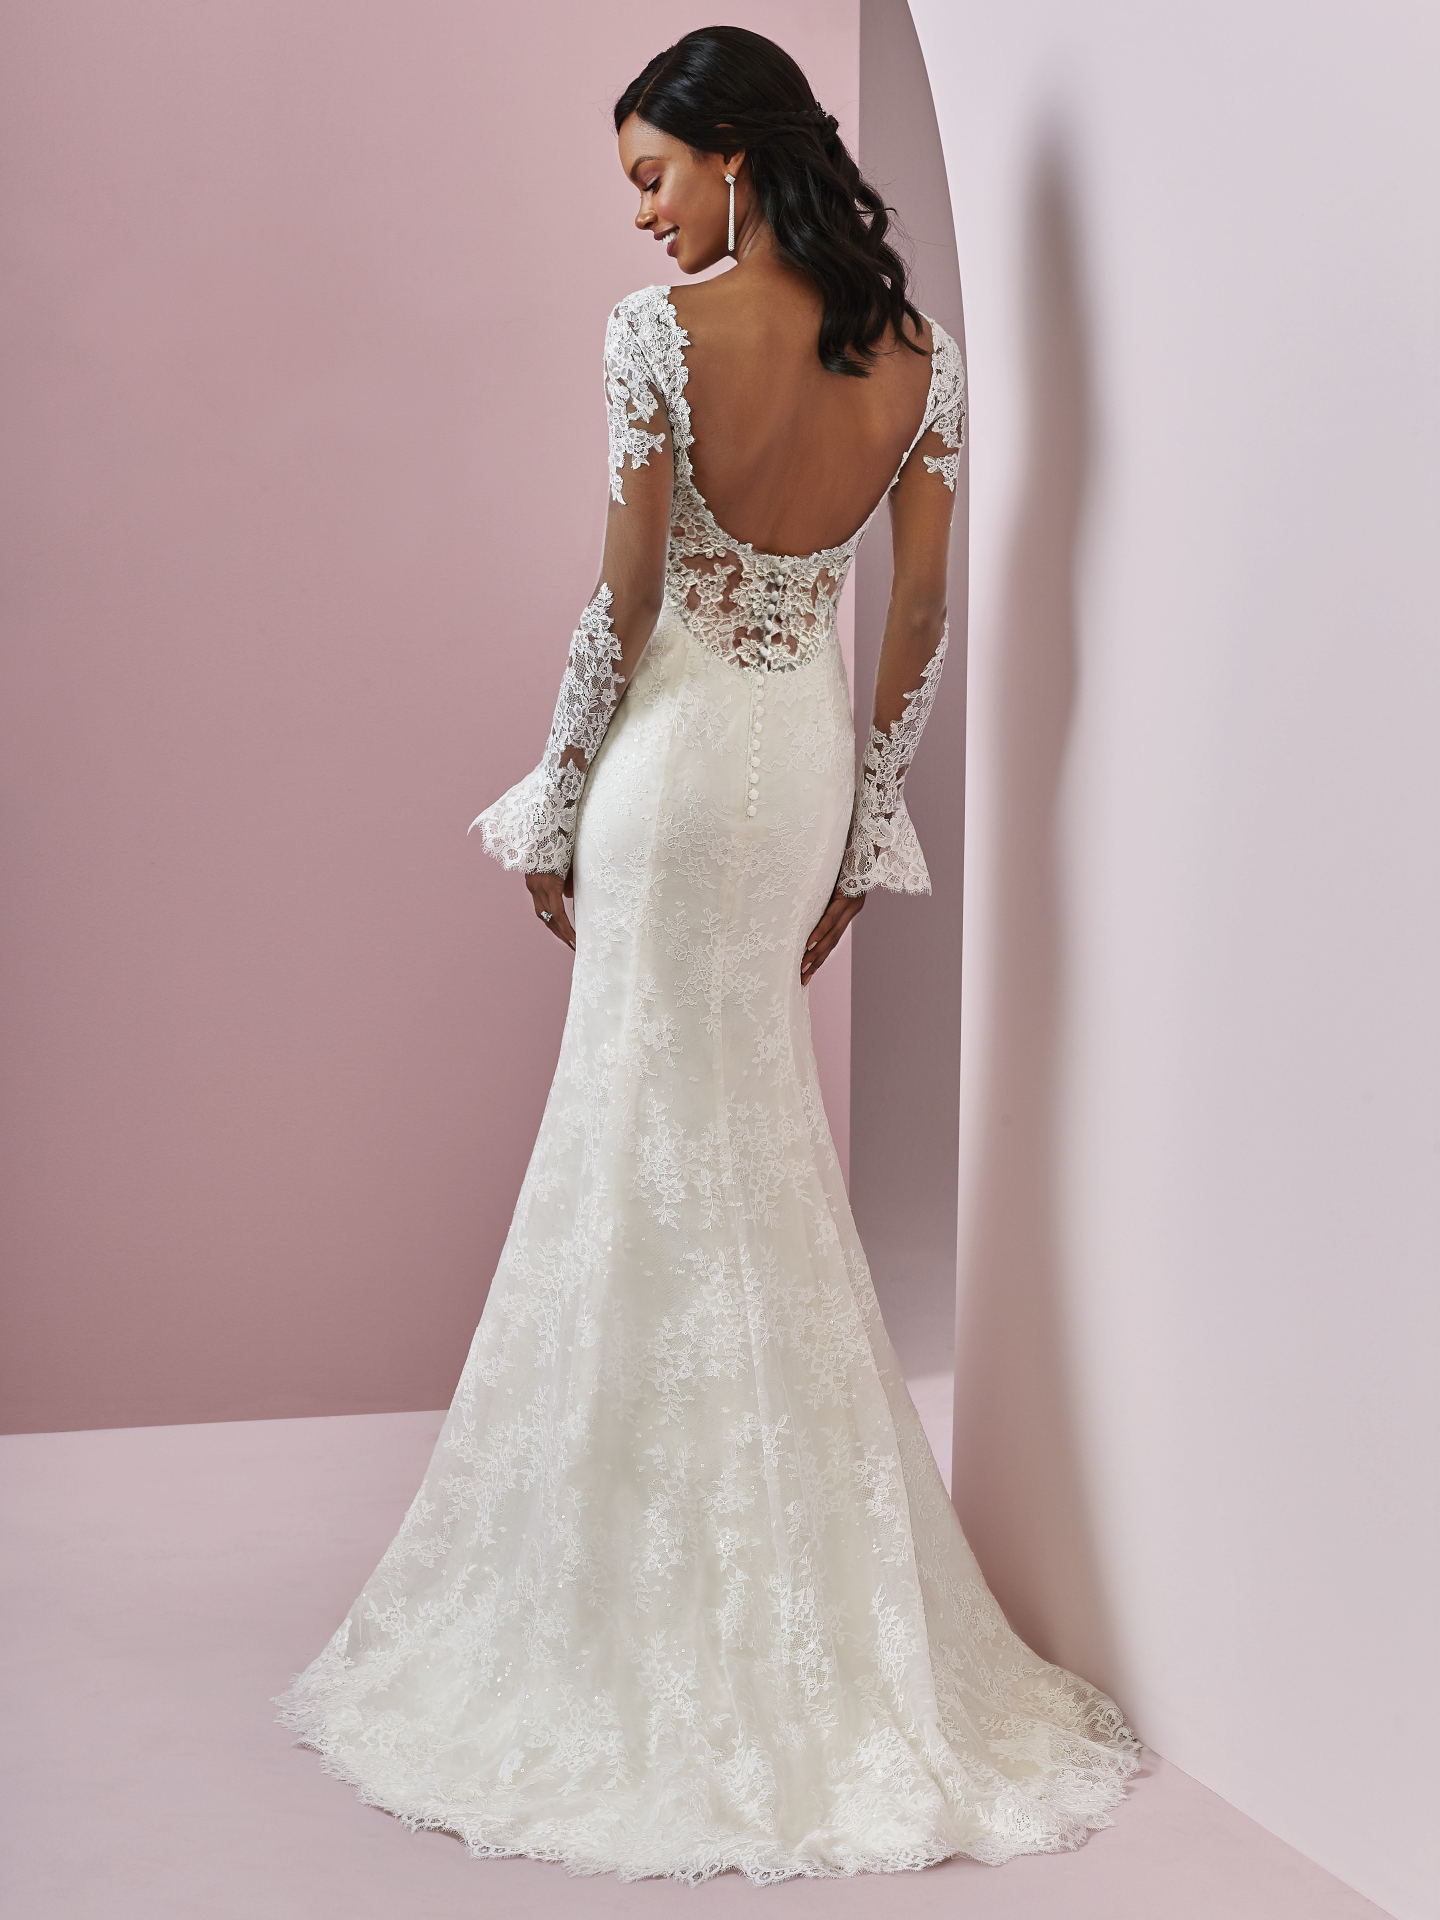 10 relaxed wedding dresses from our Camille collection by Rebecca Ingram - Choose Bonnie for an ultra-comfy sleeved wedding gown.